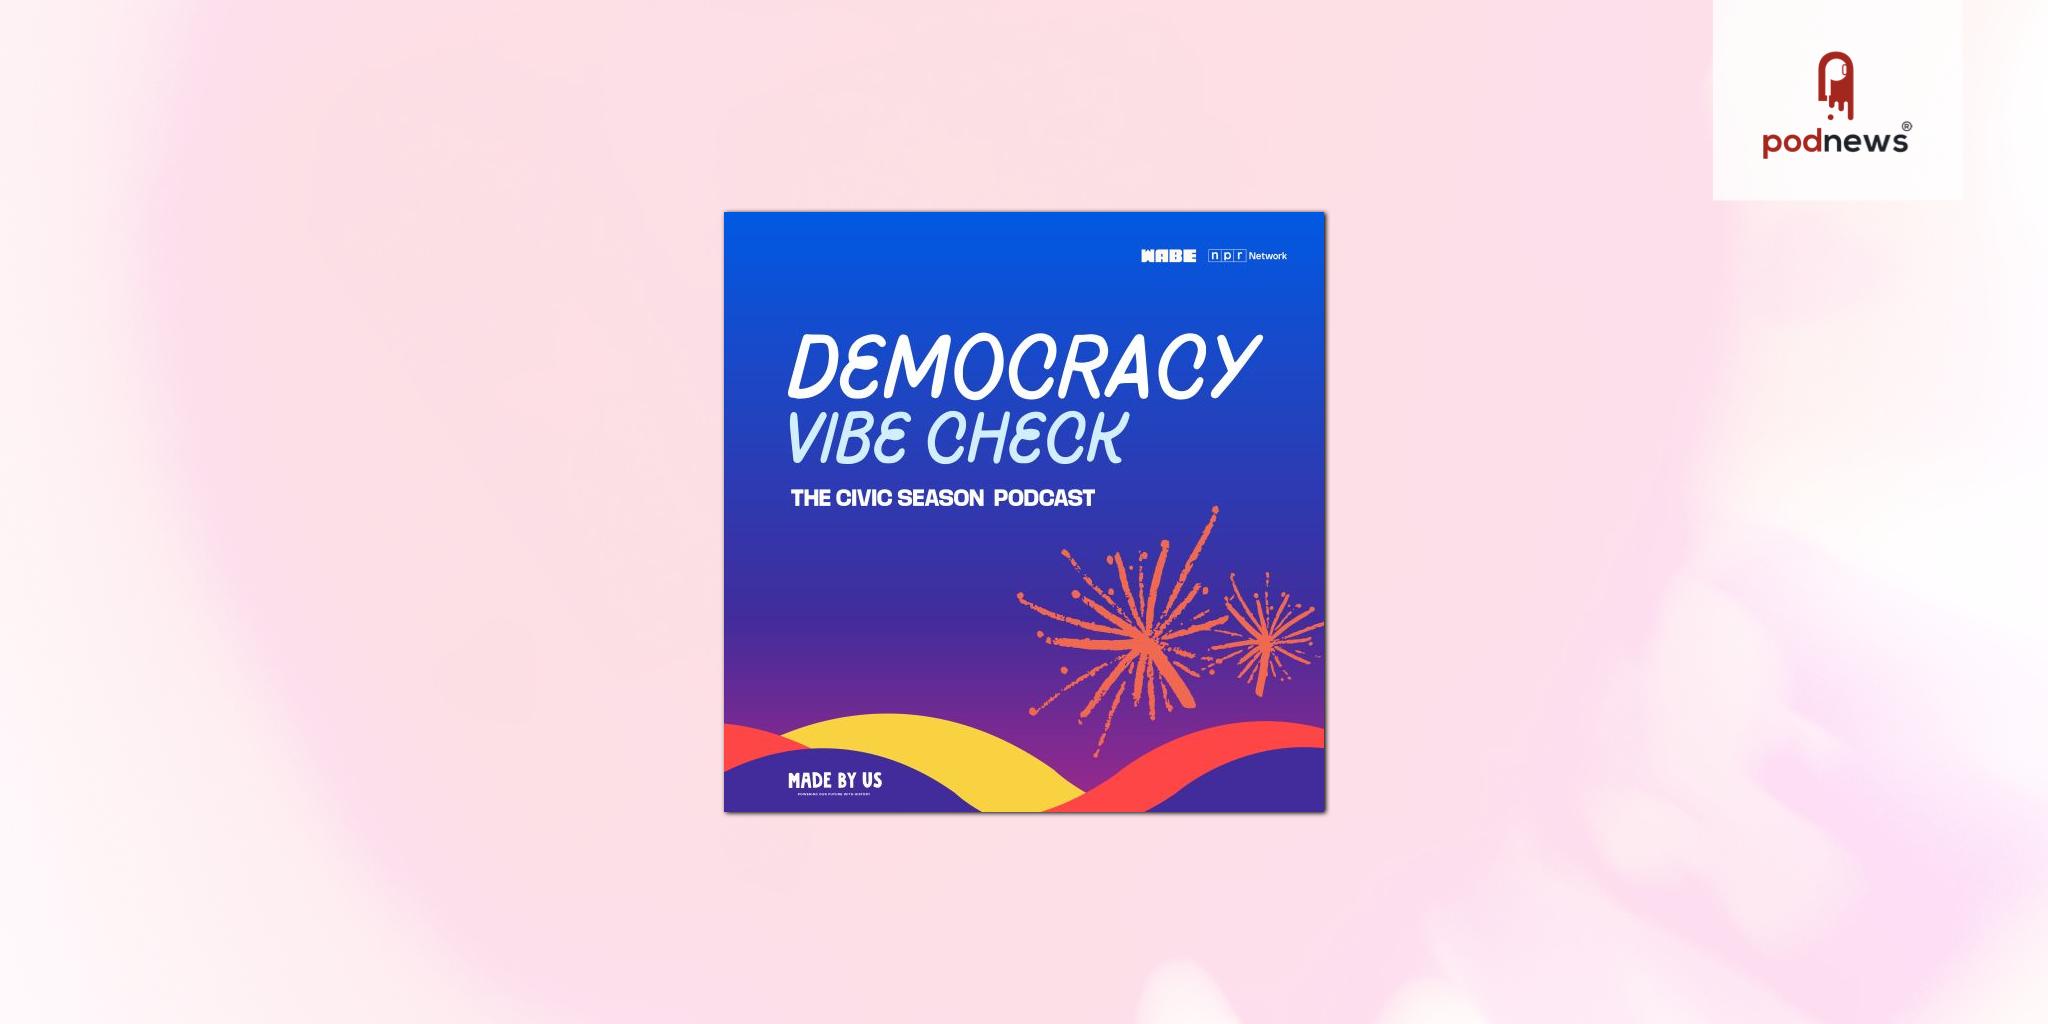 New Podcast “Democracy Vibe Check” Explores How Gen-Z Engages in Civic Season, a New American Tradition